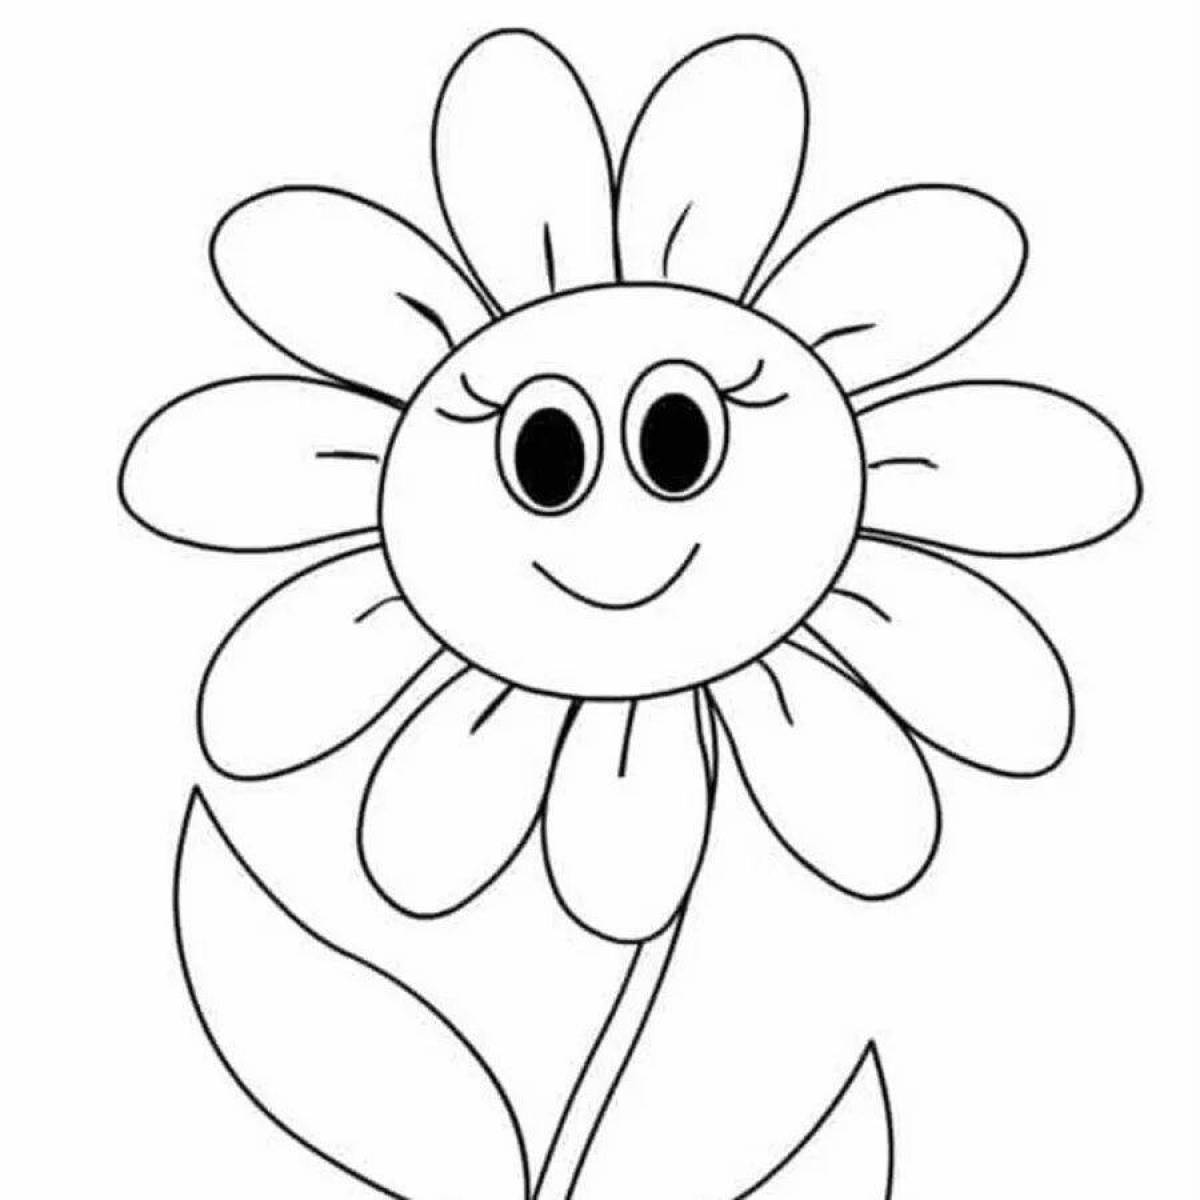 Outstanding daisy flower coloring page for youth